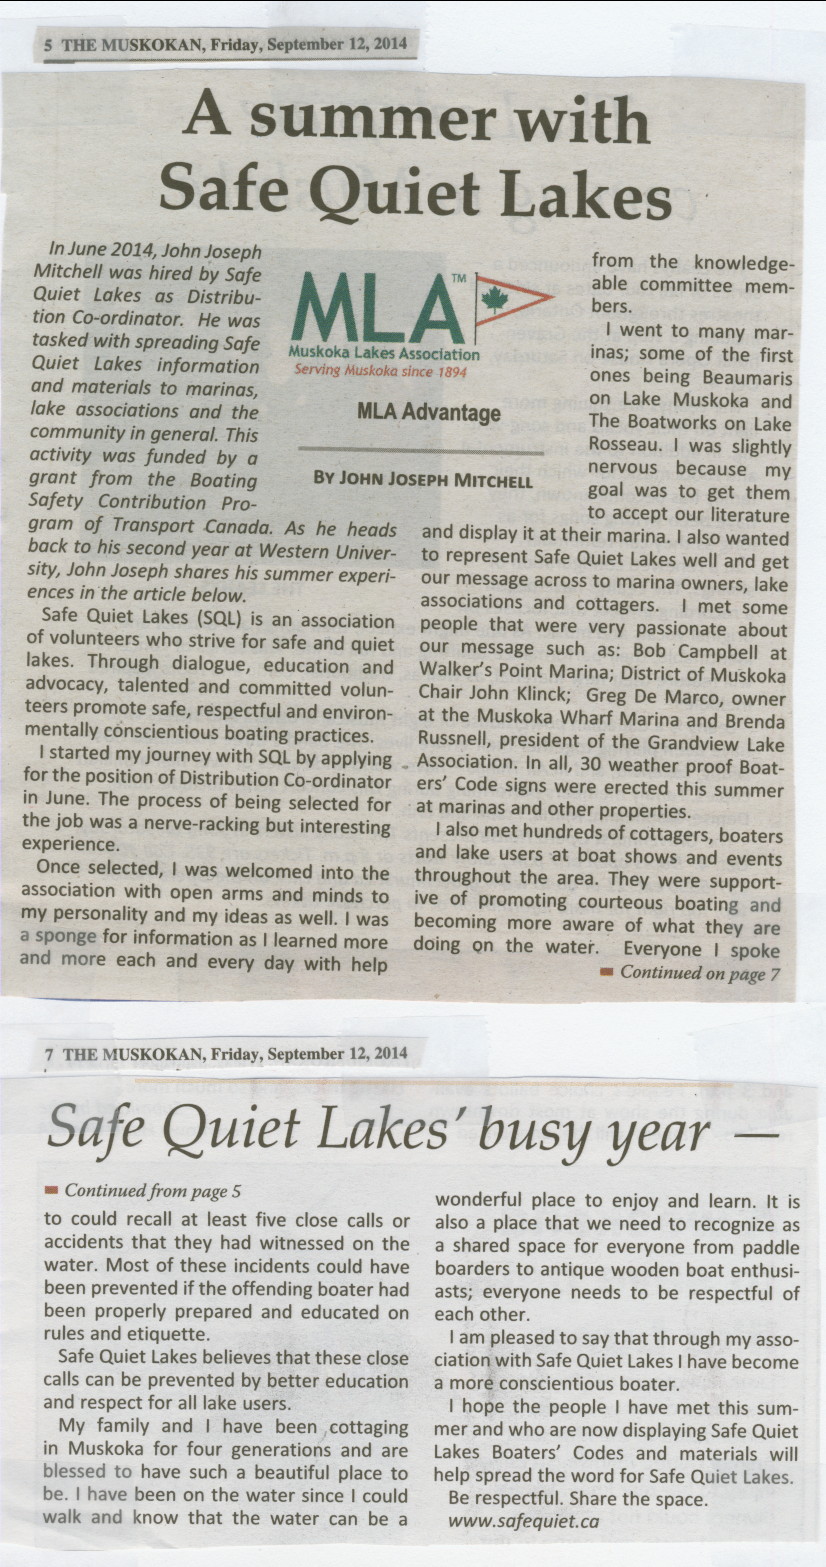 2014 - Sept 12 - A summer with Safe Quiet Lakes - The Muskoka page 5 & 7  by John Joseph Mitchell